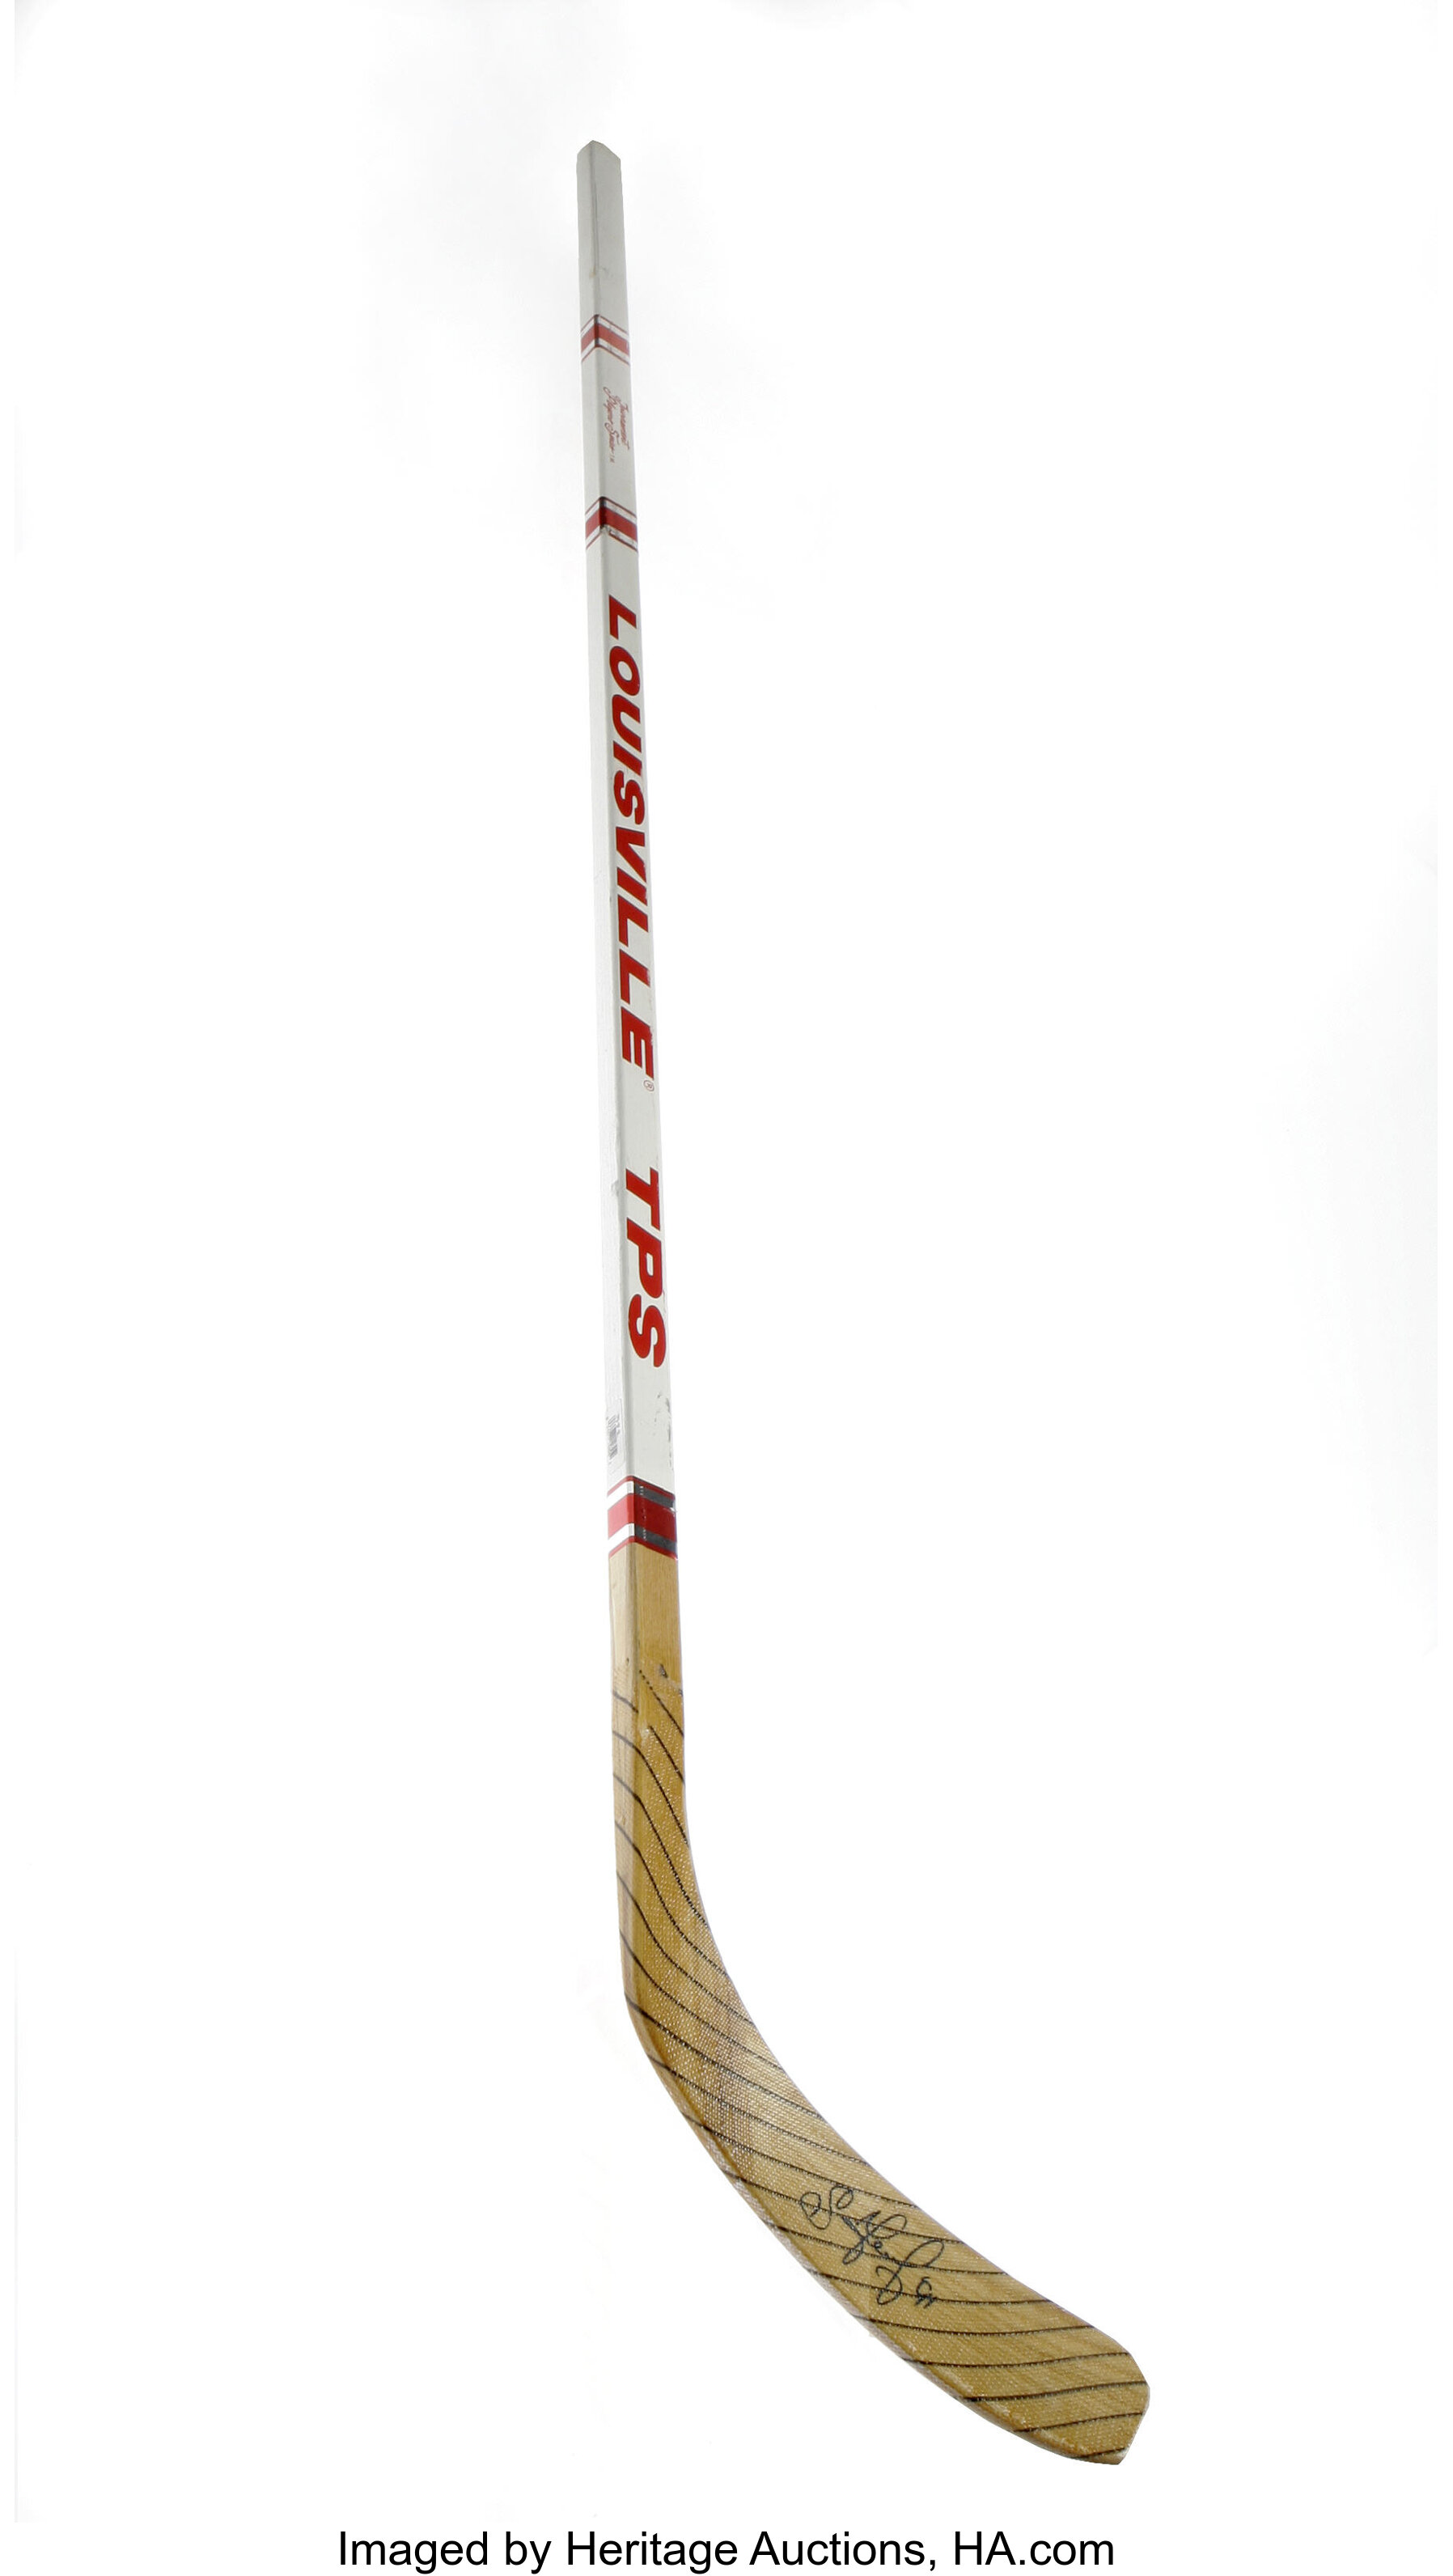 Sergei Fedorov Detroit Red Wings Autographed Hockey Stick L 63.25''